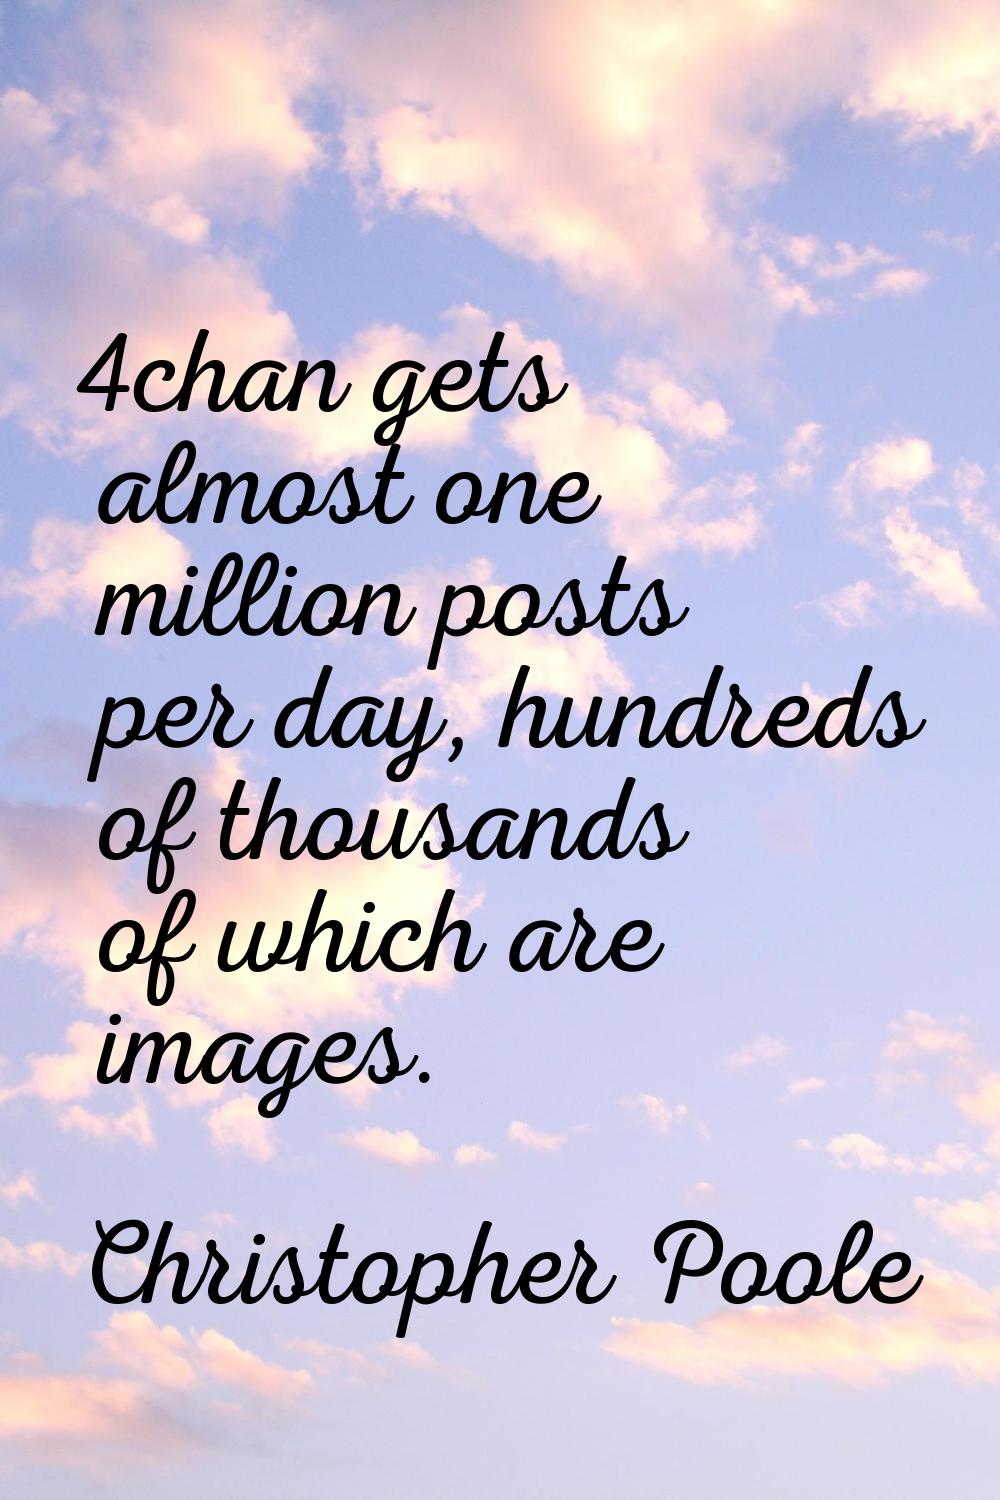 4chan gets almost one million posts per day, hundreds of thousands of which are images.